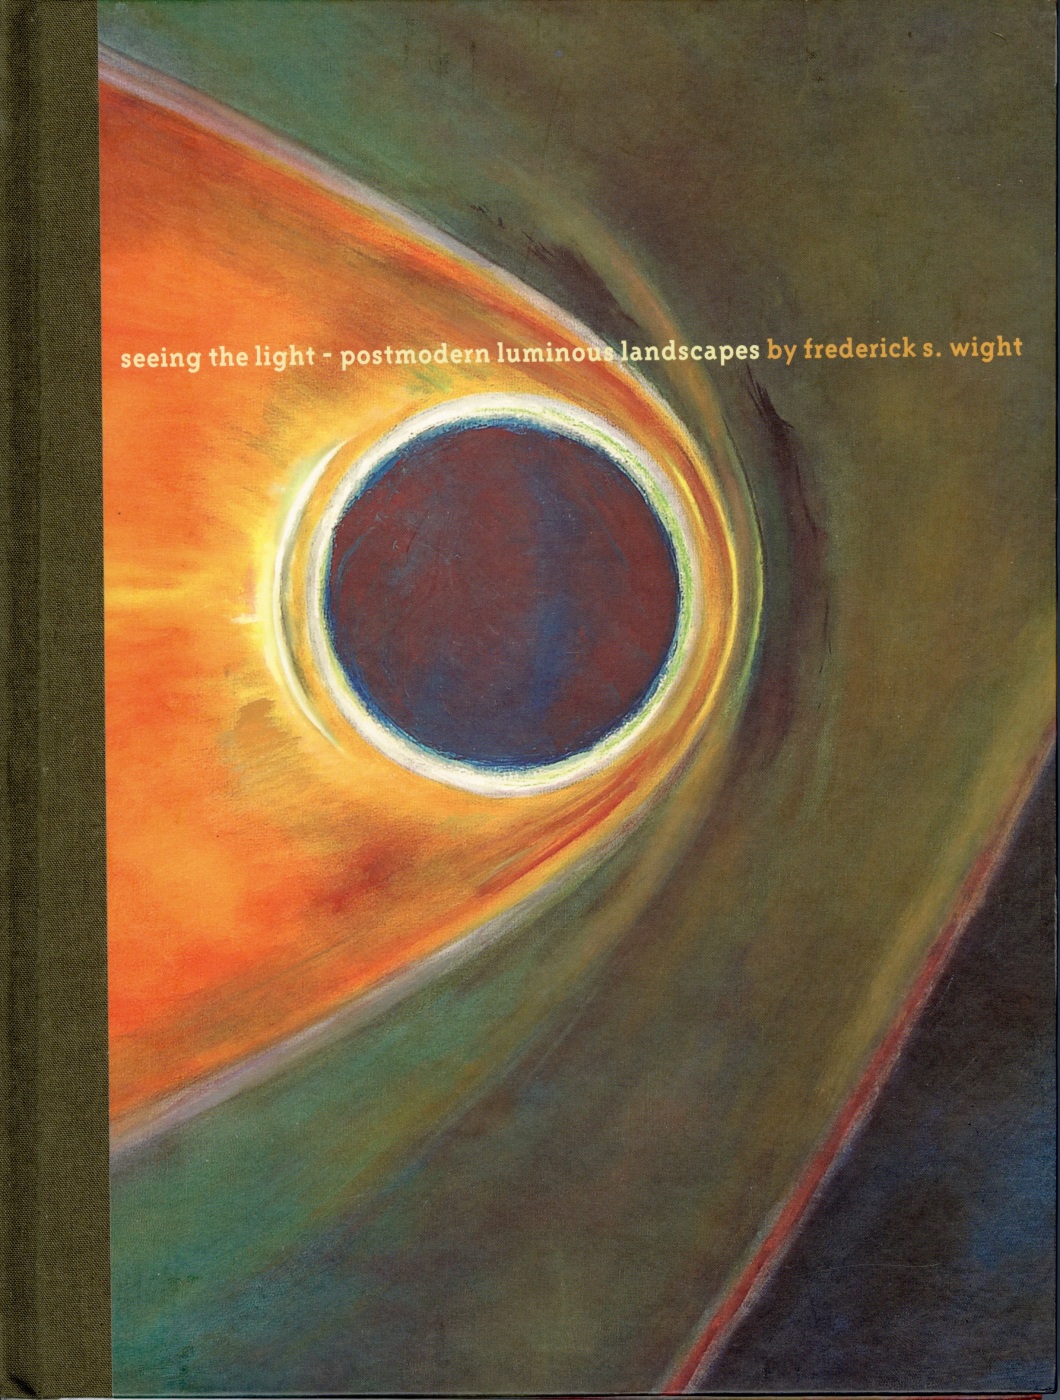 Seeing the Light - Postmodern Luminous Landscapes by Frederick S. Wight - Publications - Louis Stern Fine Arts